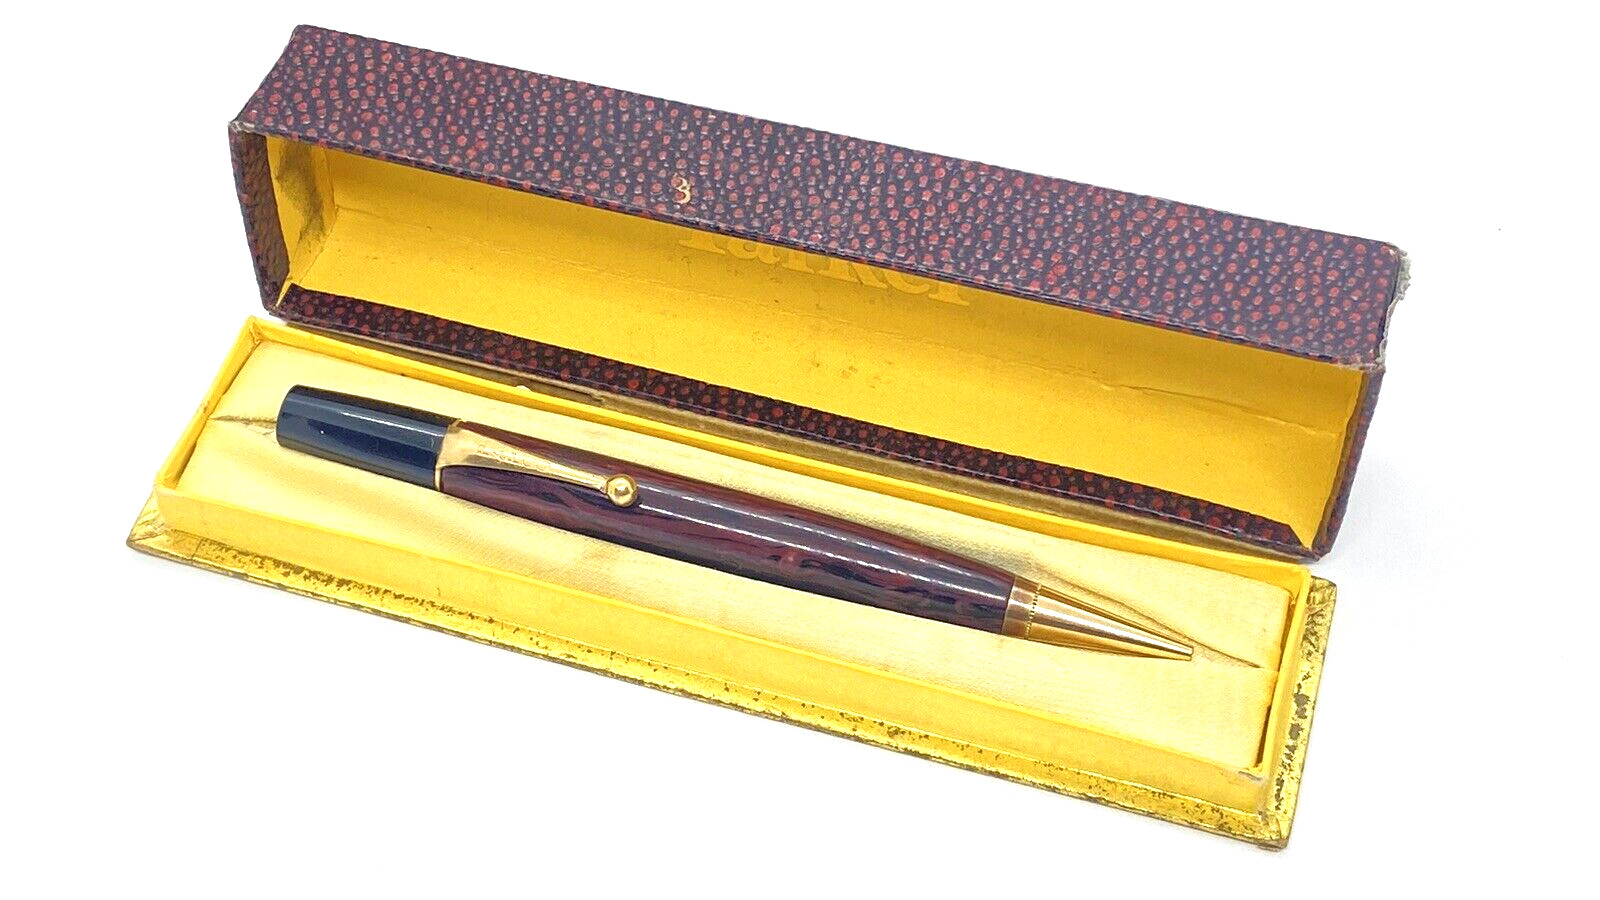 PARKER PARCO PENCIL IN RED MARBLE IN BOX MADE FOR FRENCH MARKET OC